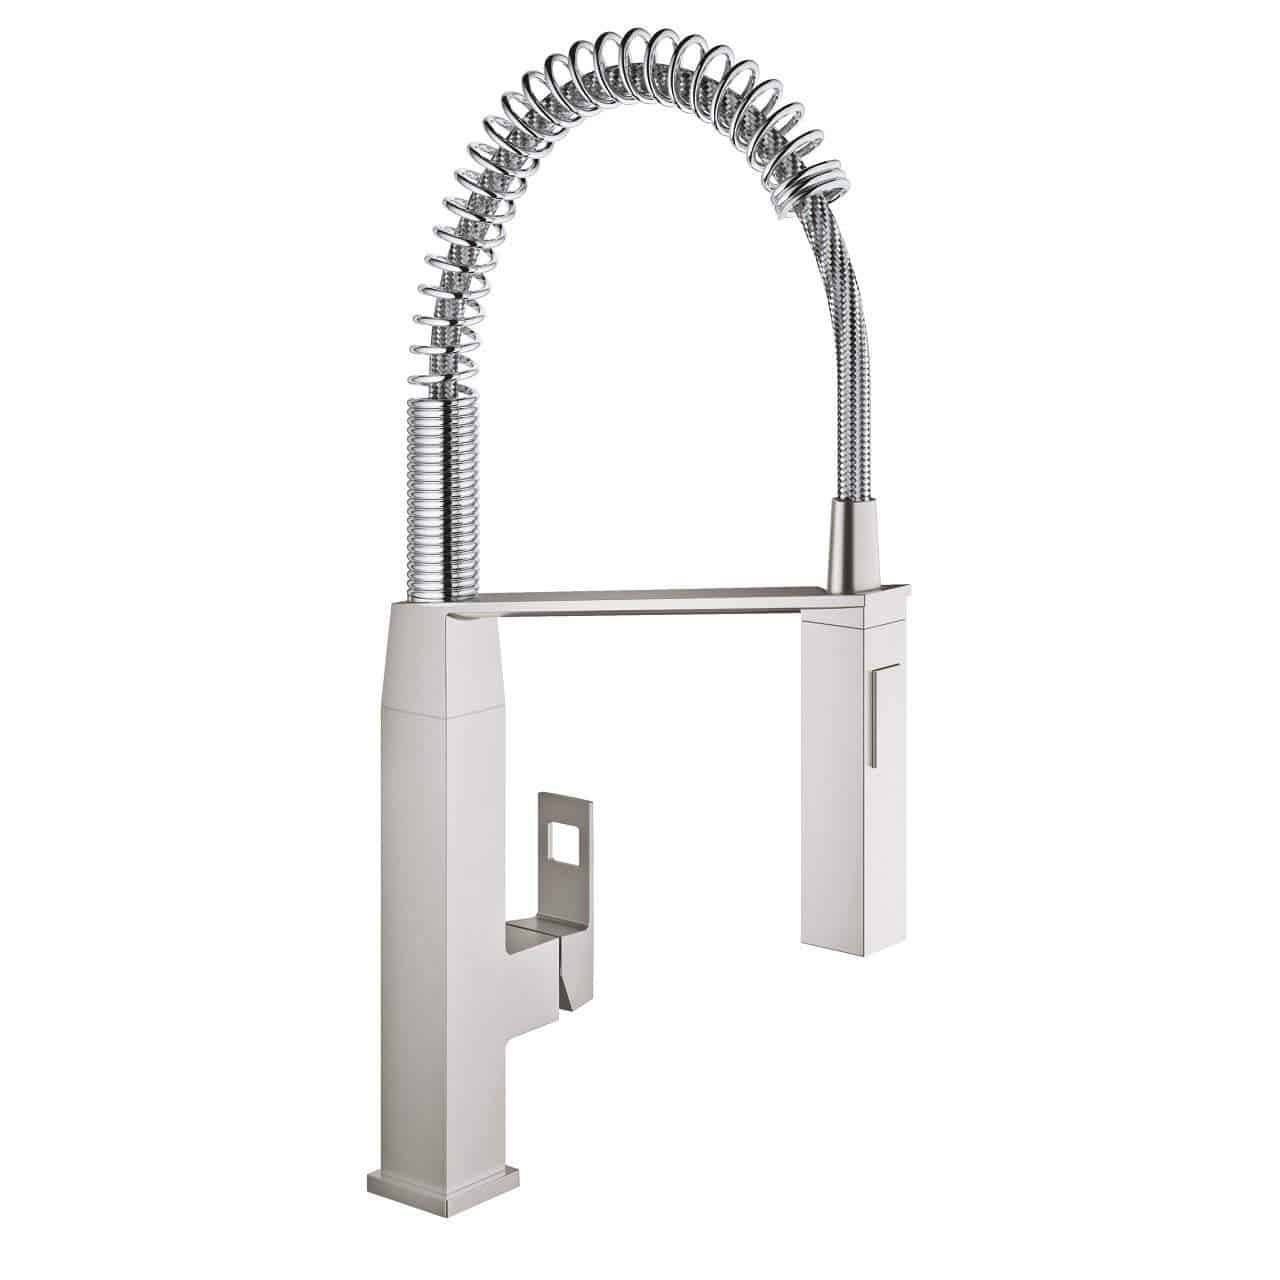 Eurocube 廚房單把手龍頭 Kitchen Single-Lever Sink Mixer-Grohe-31395DC0-Home Manner